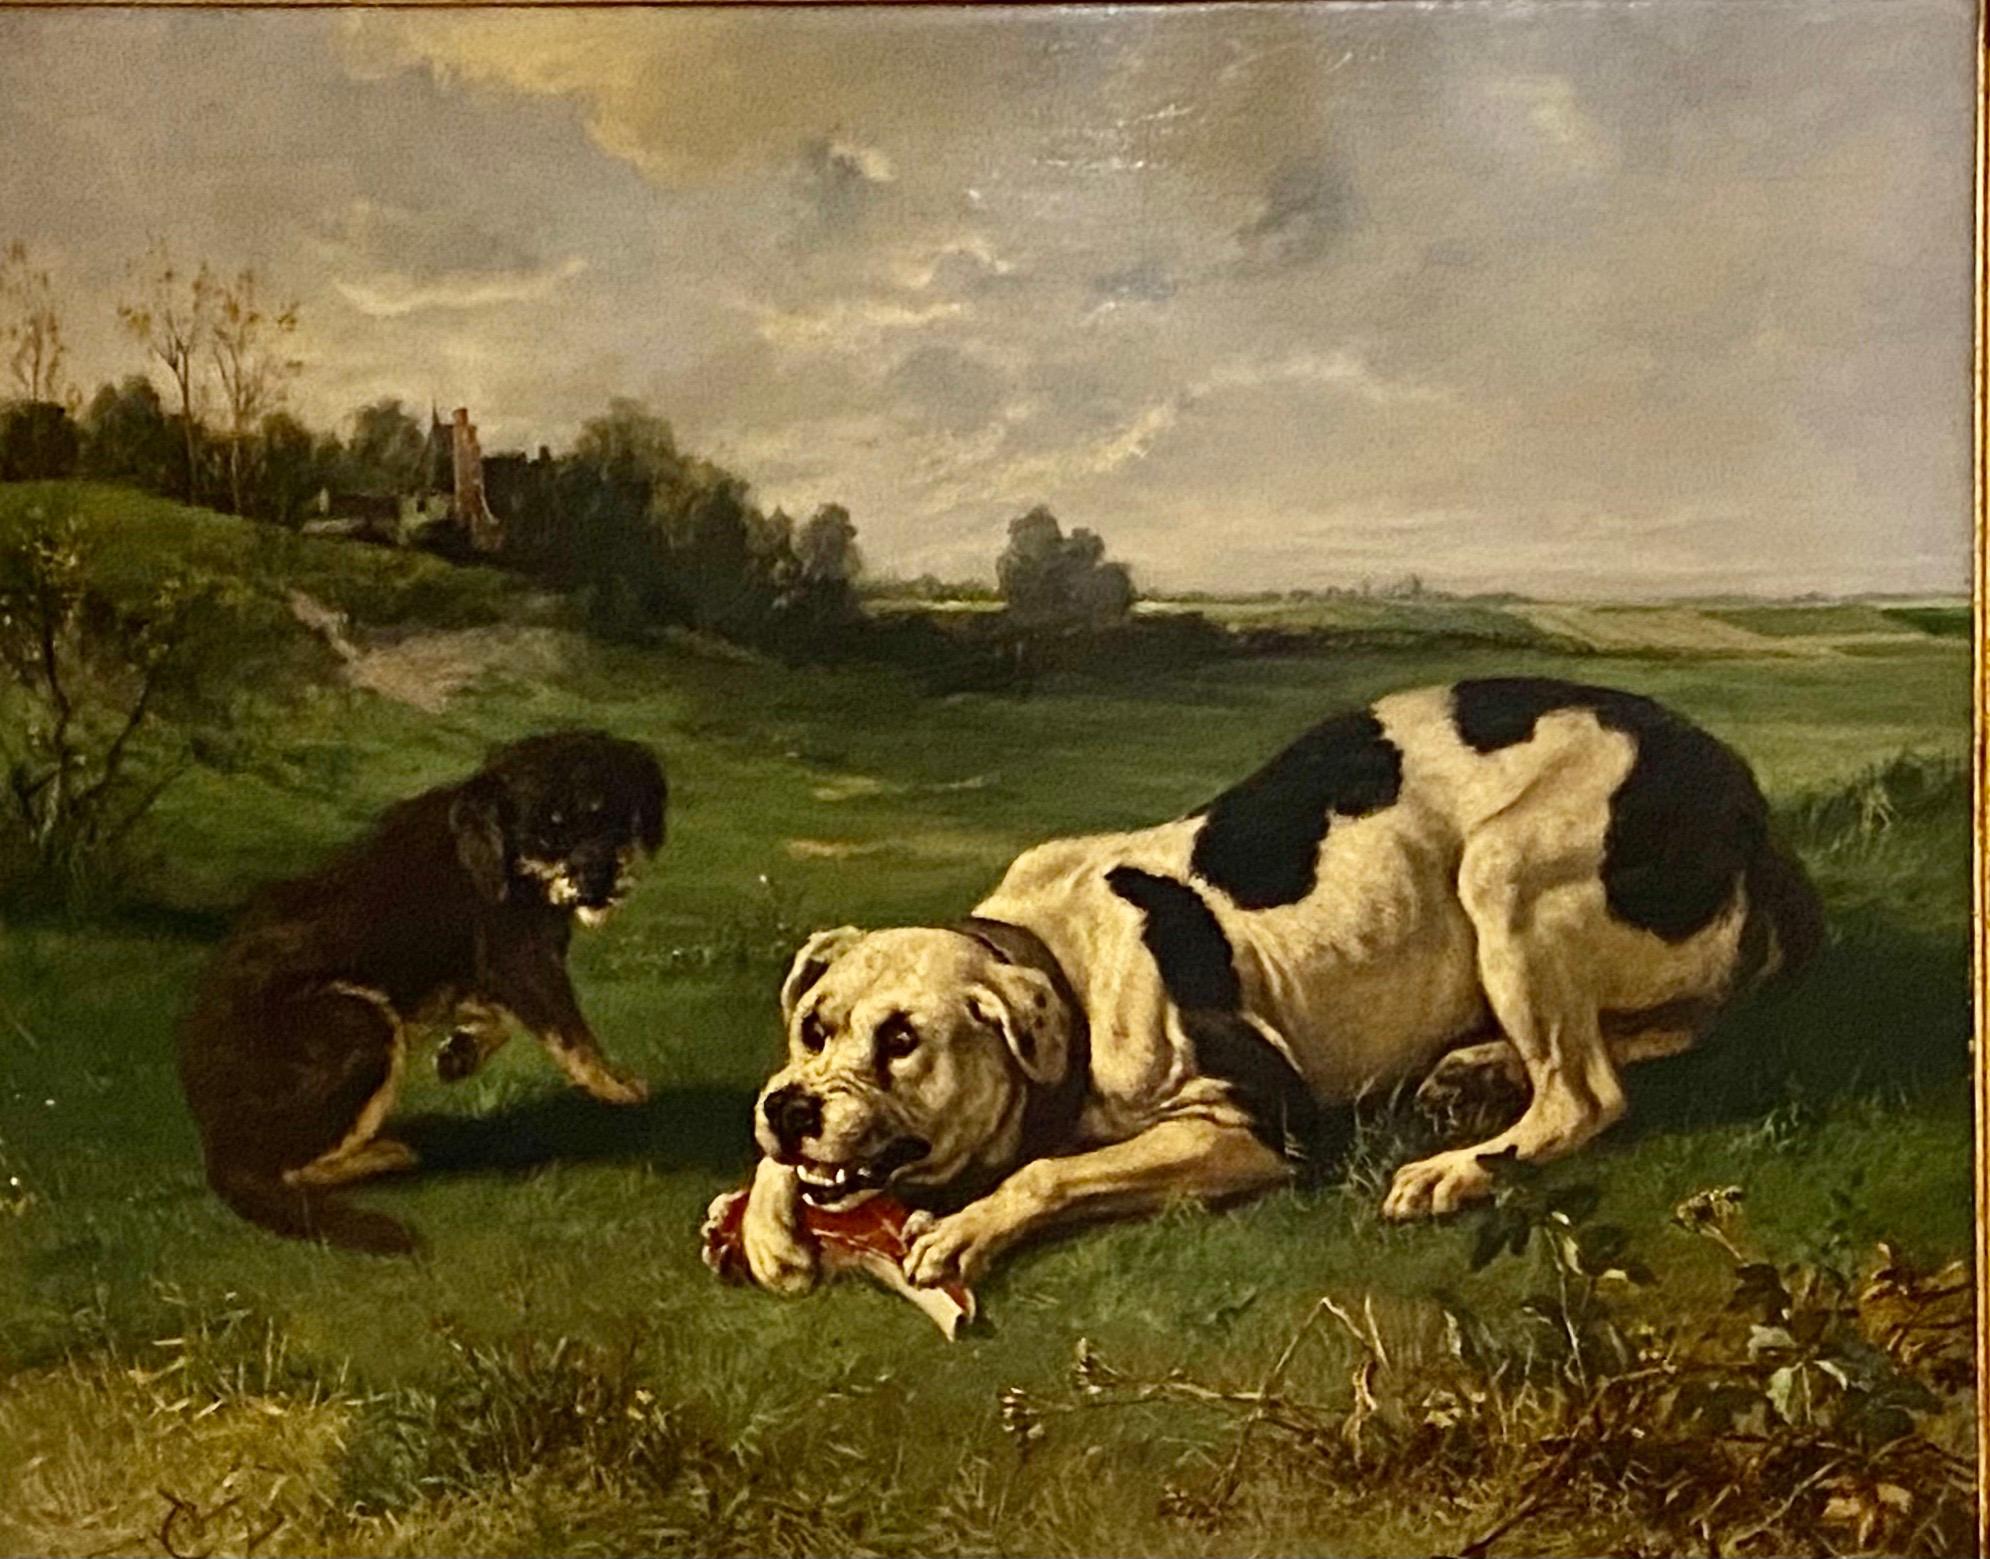 A very nice large painting of a Harlequin Dane and a Black Tan
Michel Marie Charles Verlat (25 November 1824 – 23 October 1890) was a Belgian painter from Antwerp.
He was a pupil of Nicaise de Keyser, and studied at the Antwerp Academy.[1]
In